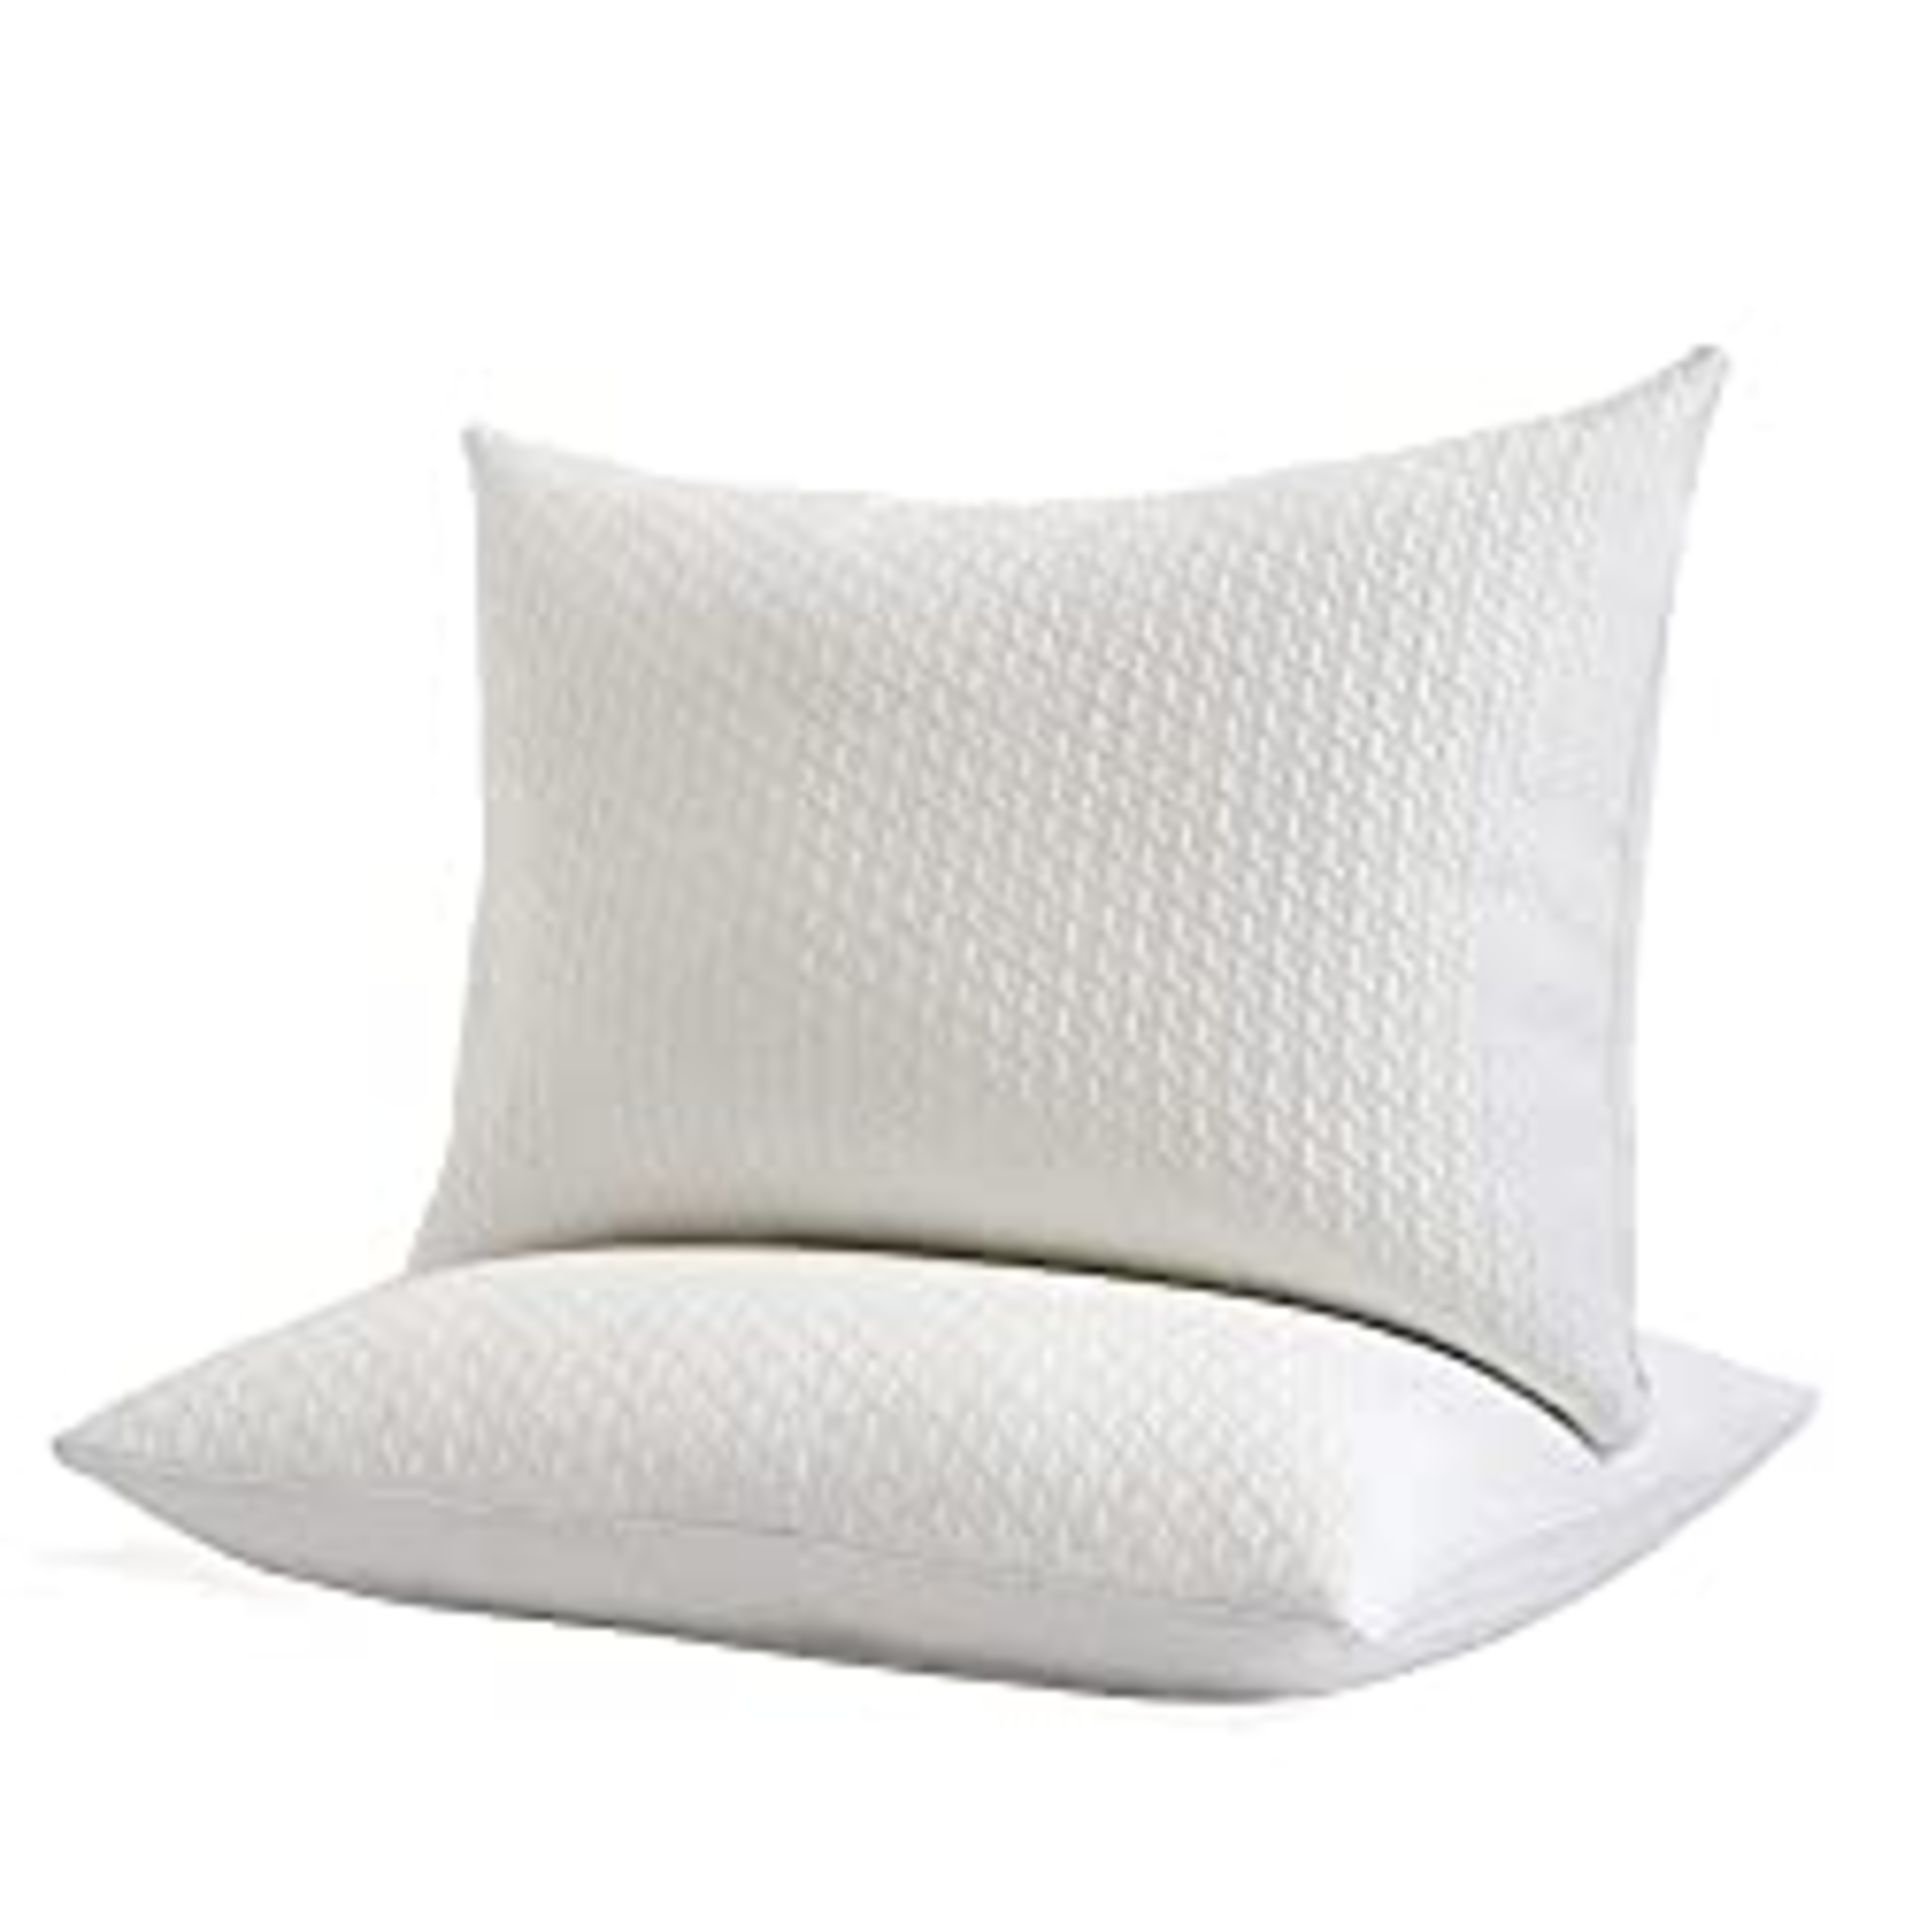 RRP £35.99 JZS Luxury Hotel Pillows 2 Pack Hotel Quality for Sleeping